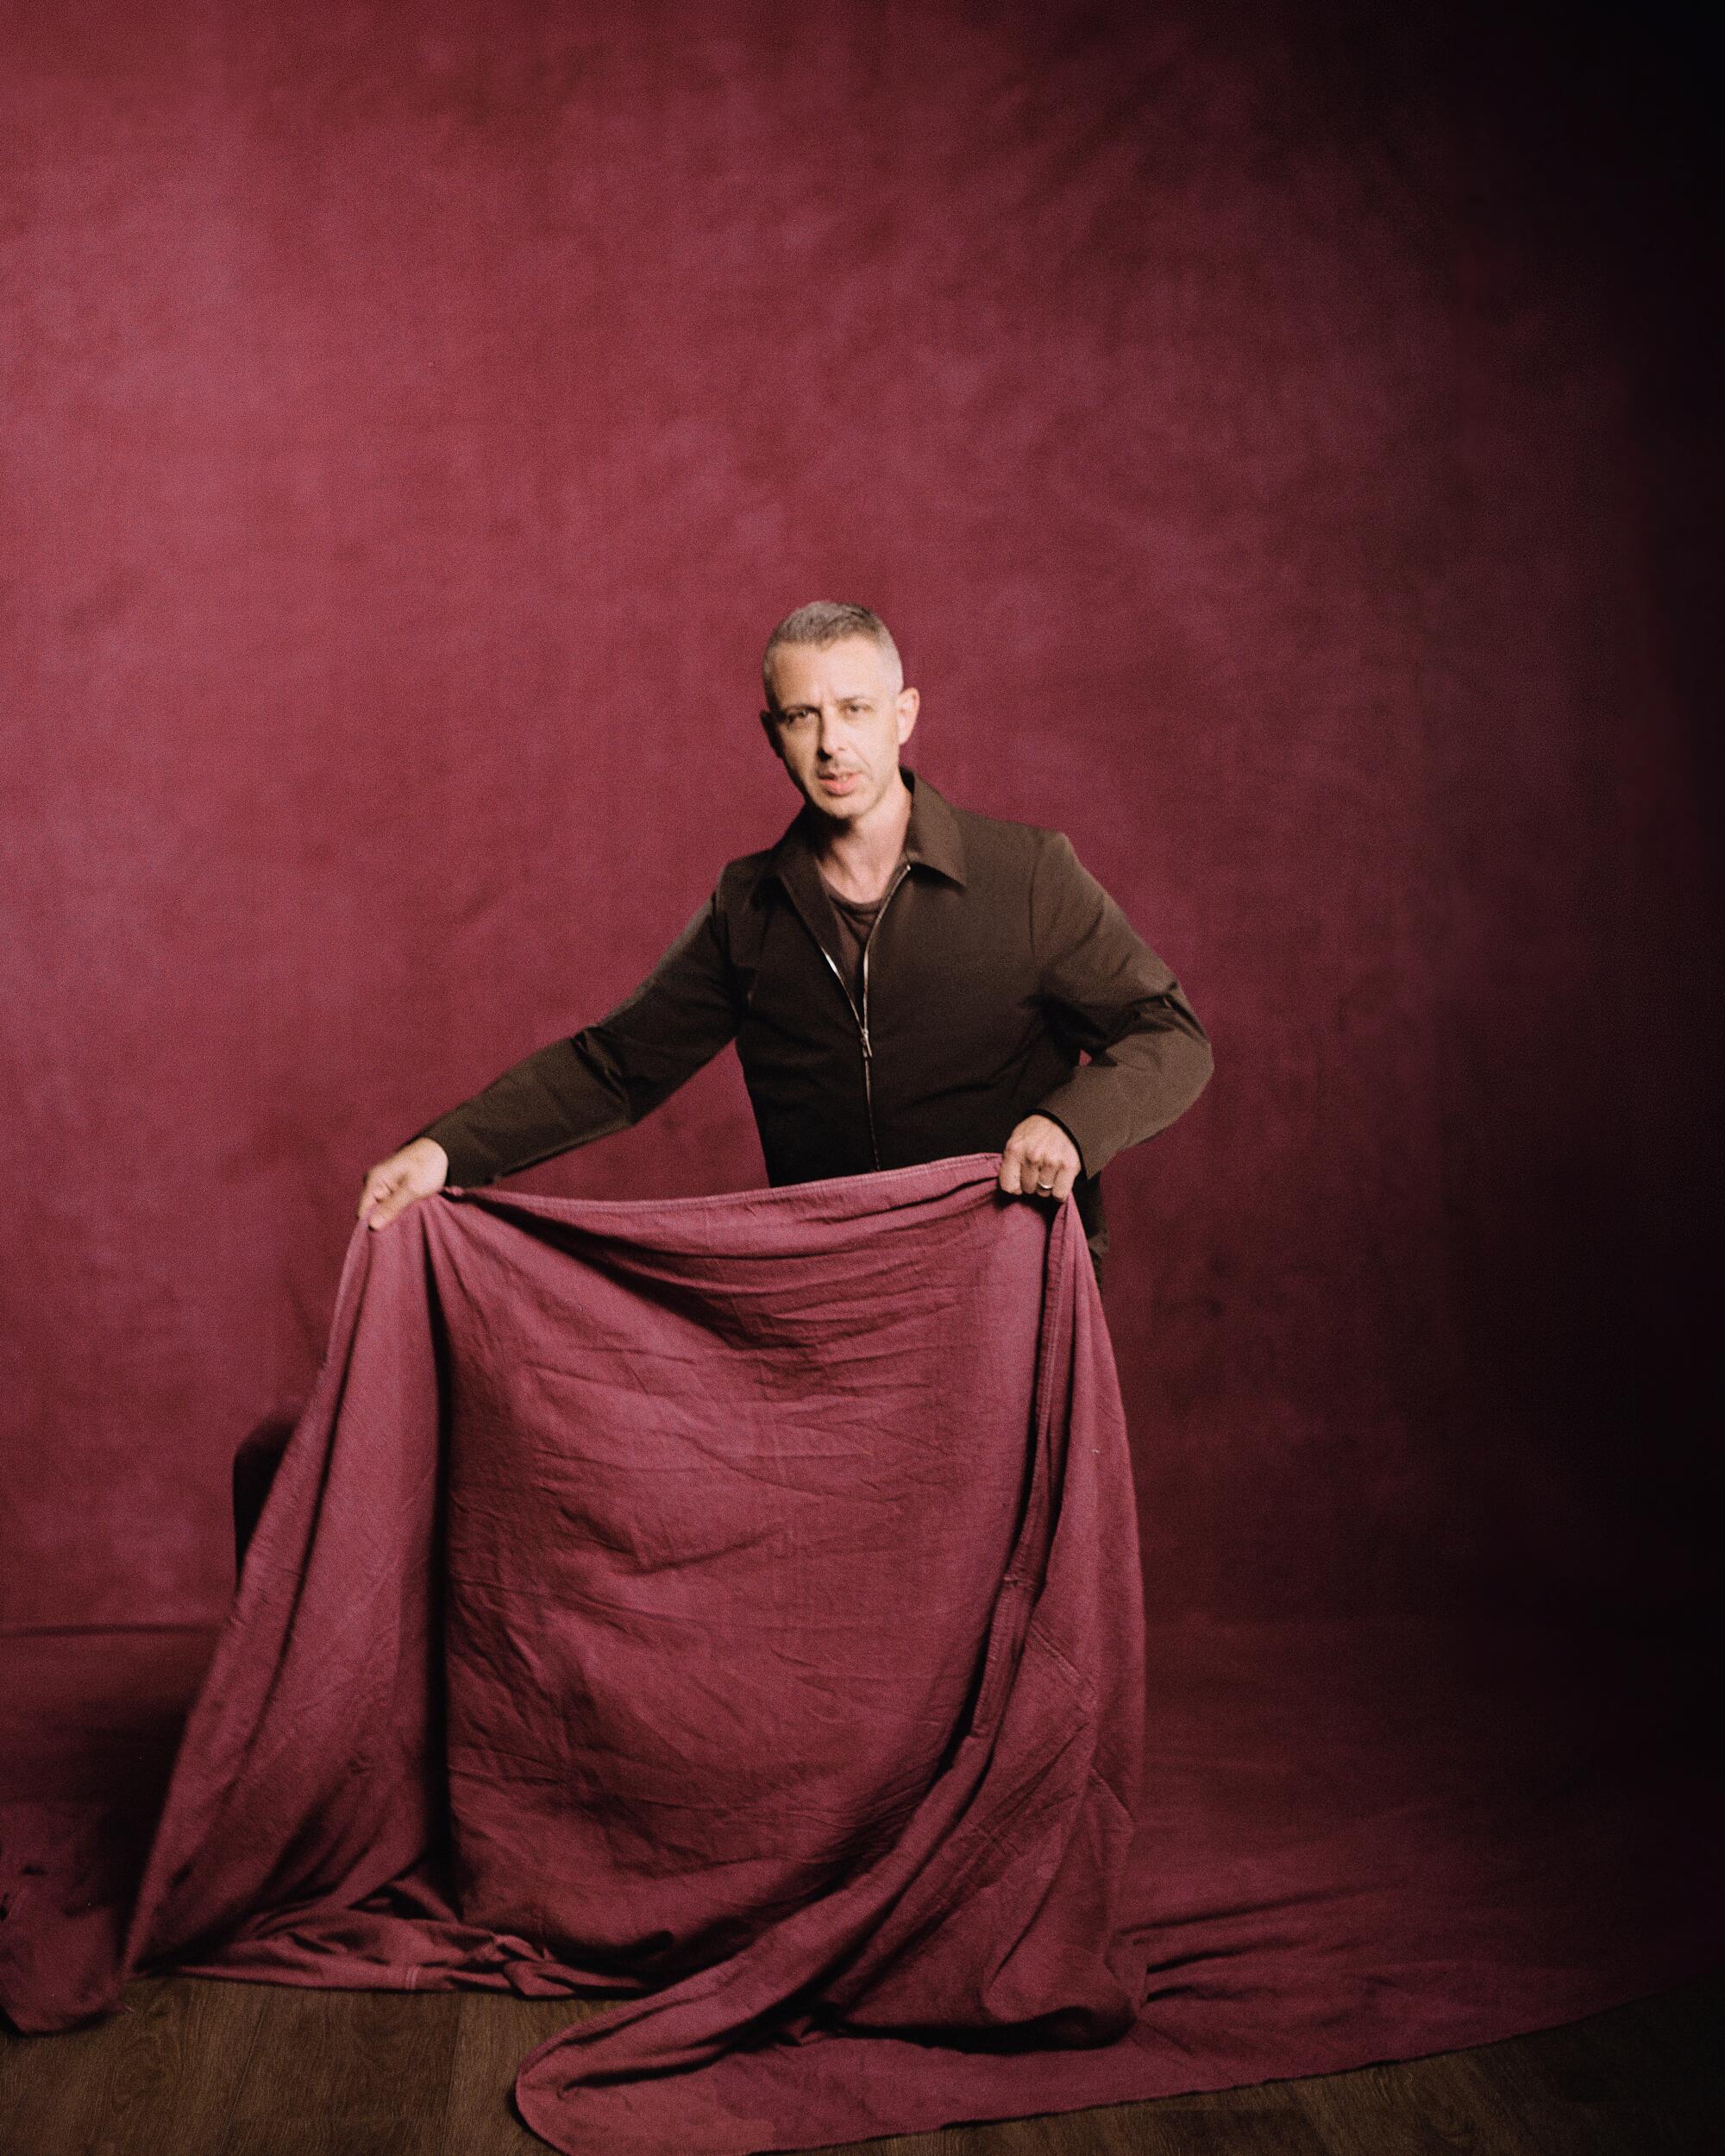 Actor Jeremy Strong in holds up a dropcloth like a matador's cape for a portrait.